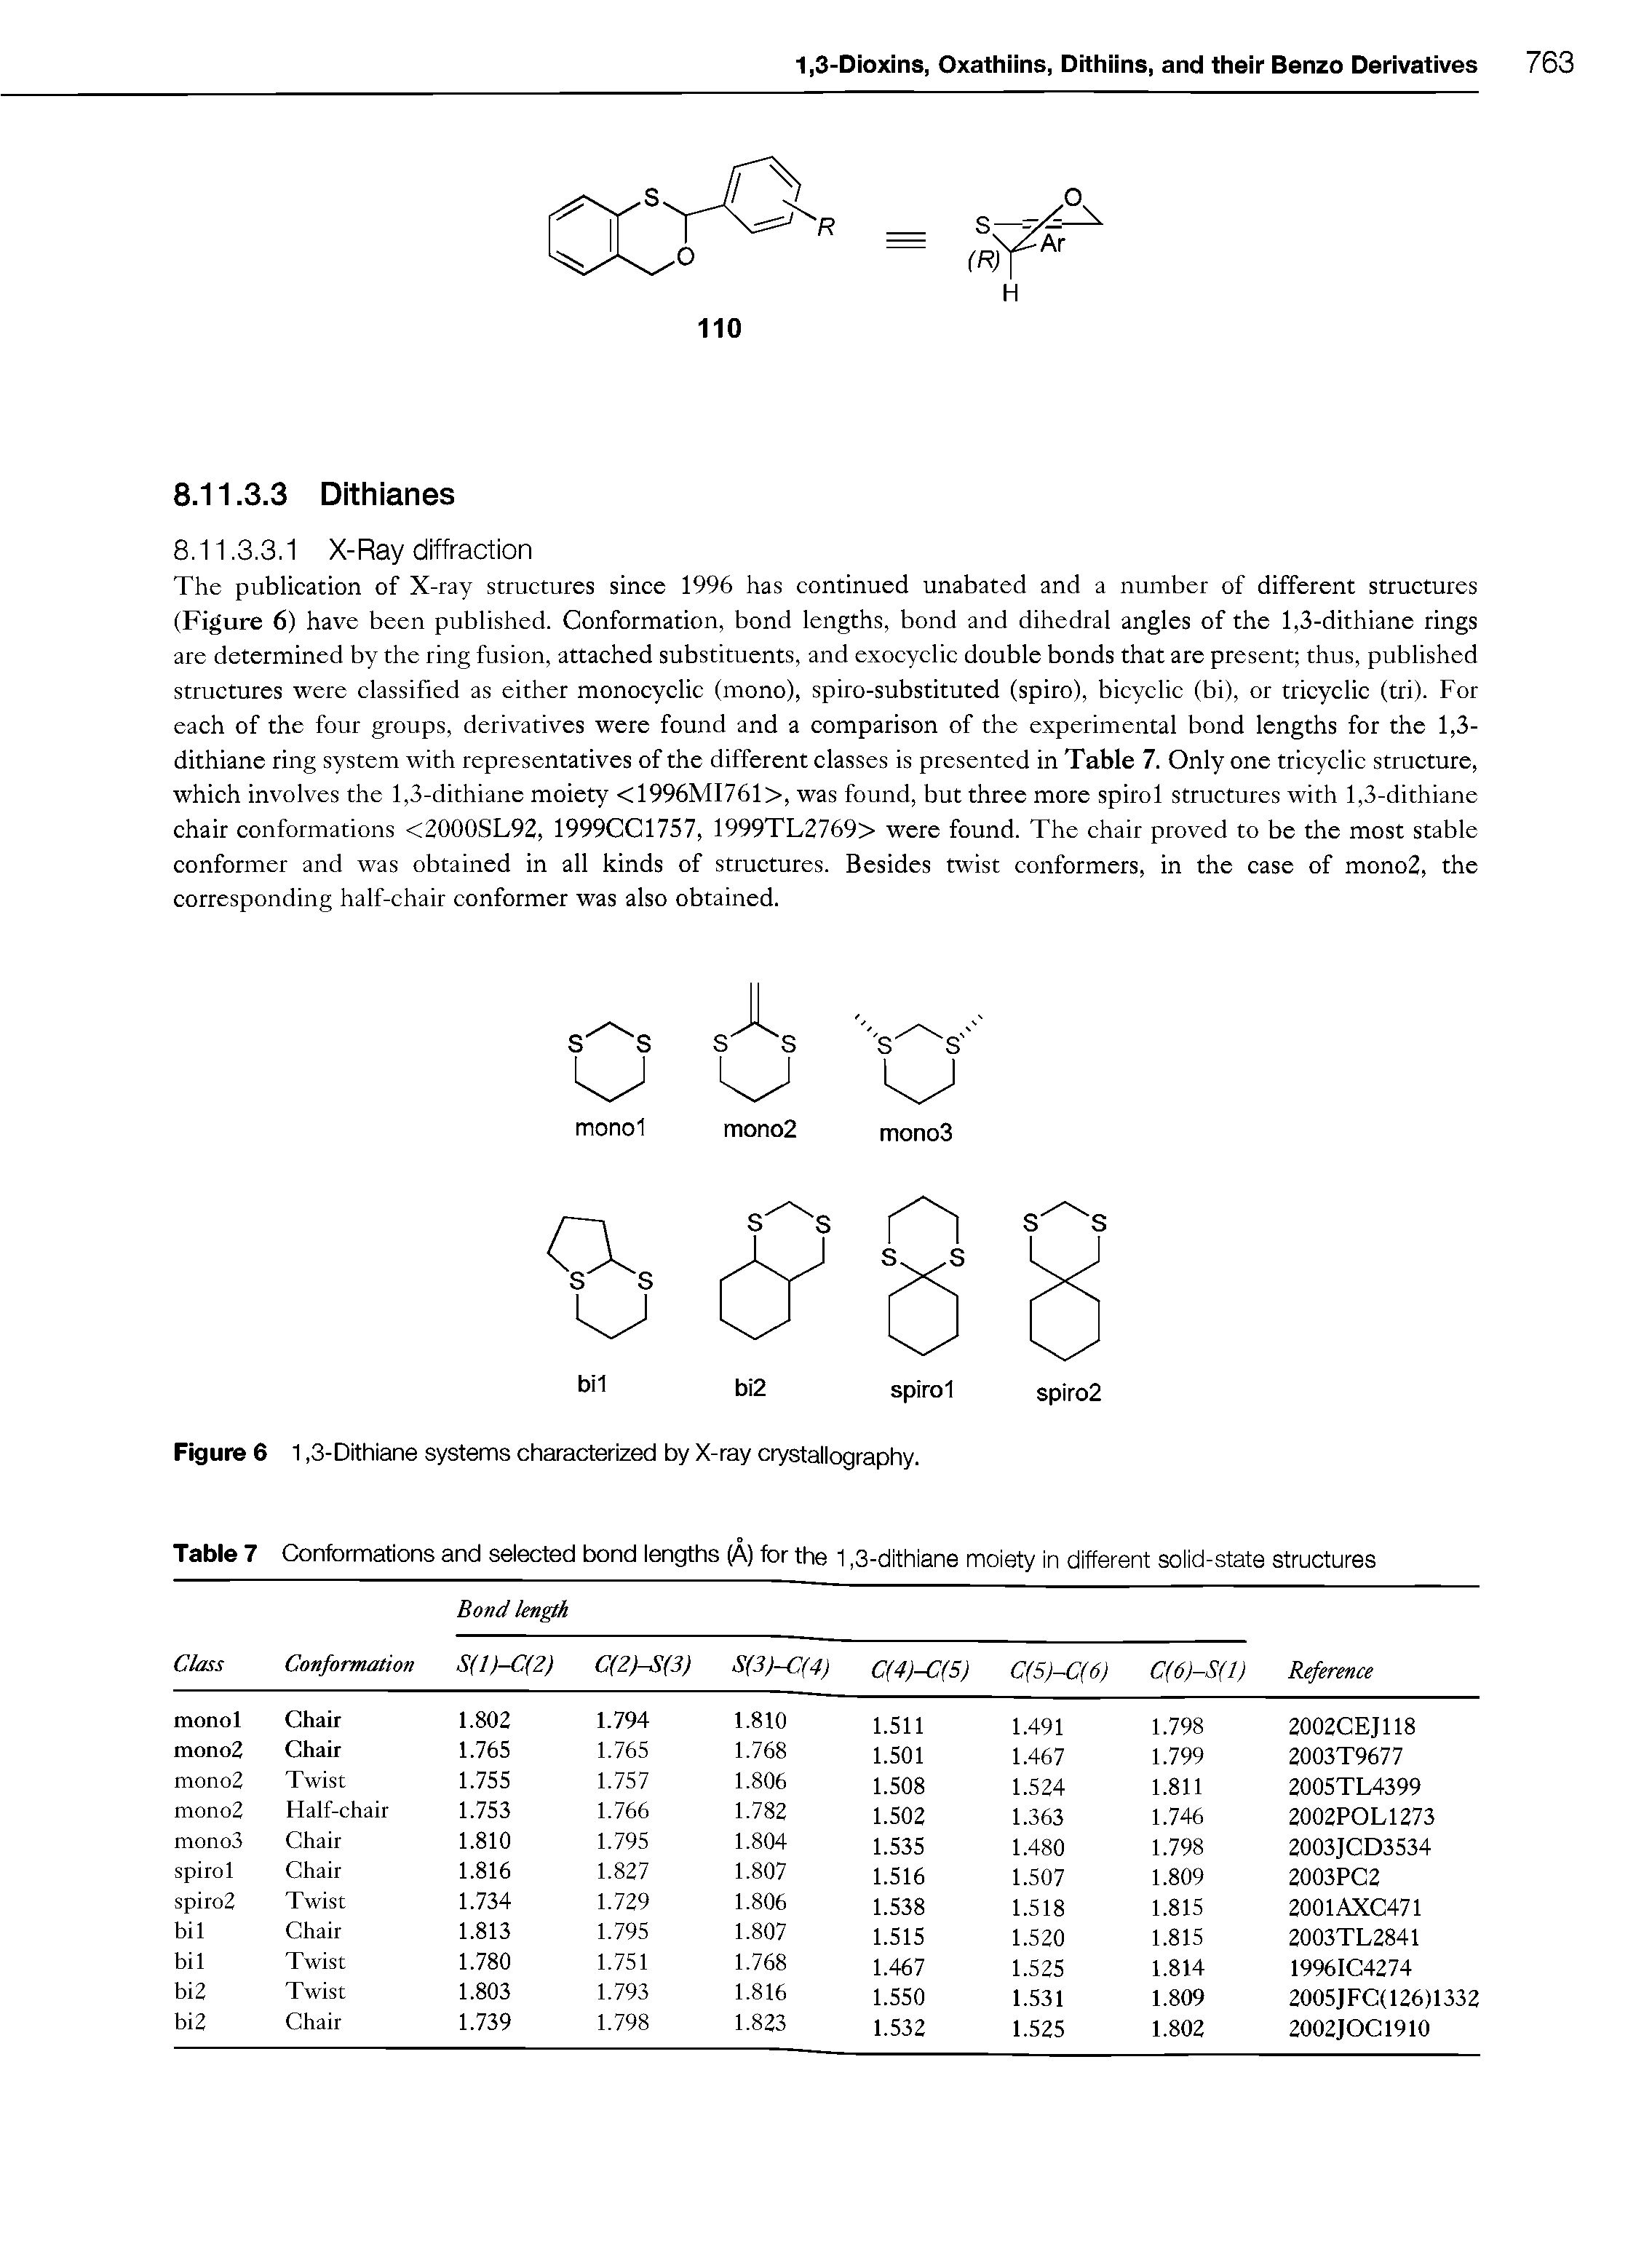 Table 7 Conformations and selected bond lengths (A) for the 1,3-dithiane moiety in different soiid-state structures...